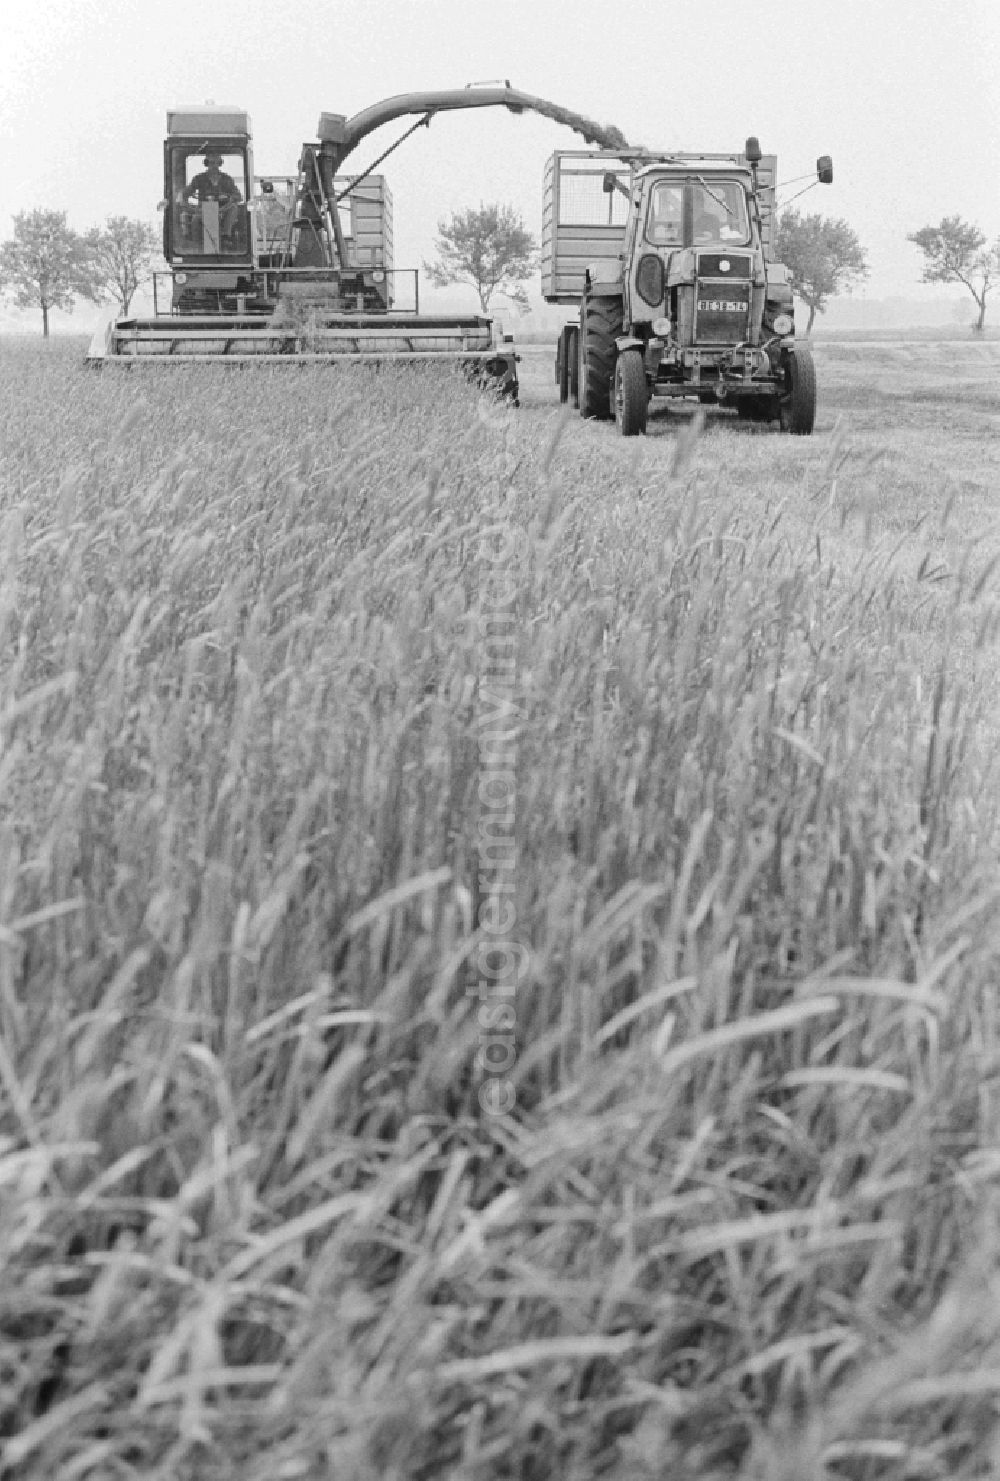 GDR image archive: Lenzen (Elbe) - Cereal harvest in a field in Lenzen (Elbe) in Brandenburg in the area of the former GDR, German Democratic Republic. A combine harvests the crop and transported it right on a trailer of a tractor